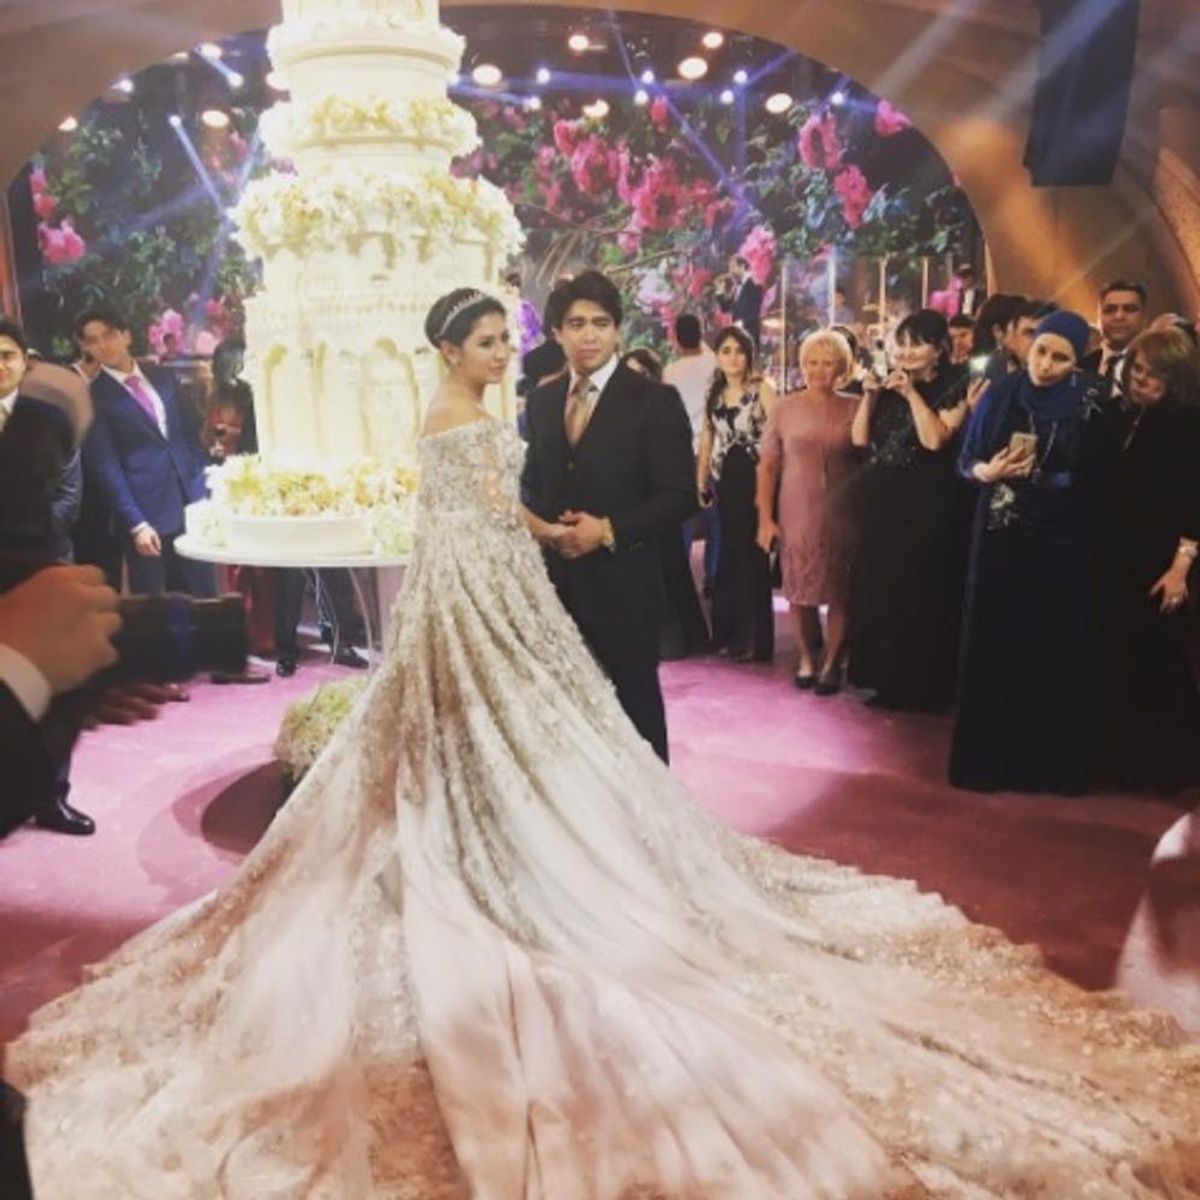 This Wildly Luxe Wedding Included a $600K Dress, Private Jet and 10-Foot Tall Cake